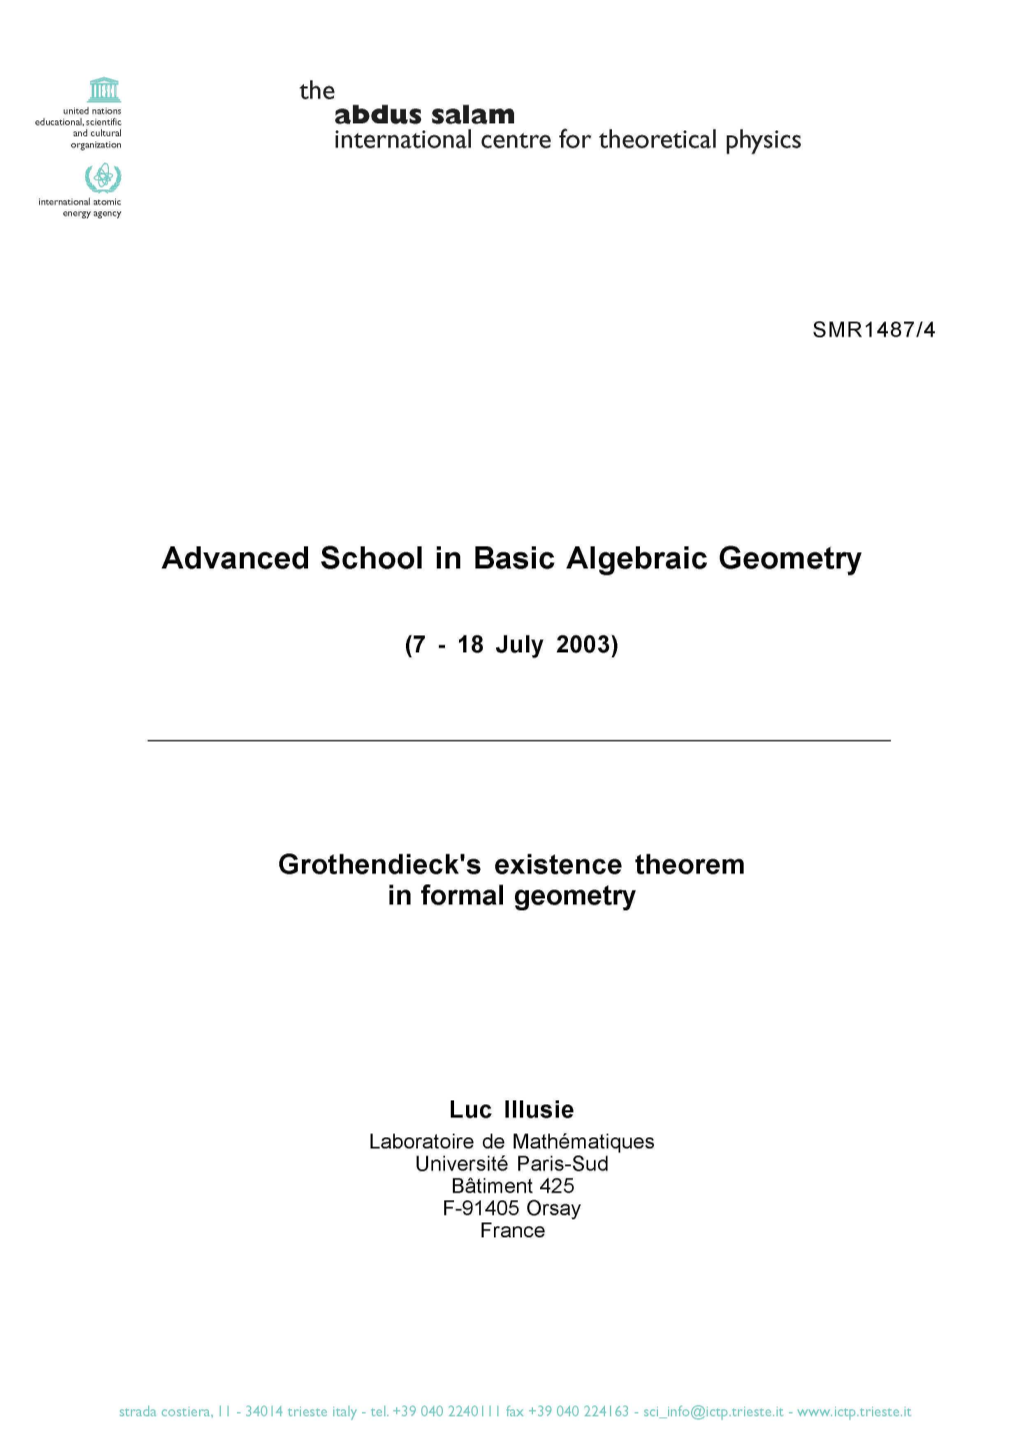 Grothendieck's Existence Theorem in Formal Geometry